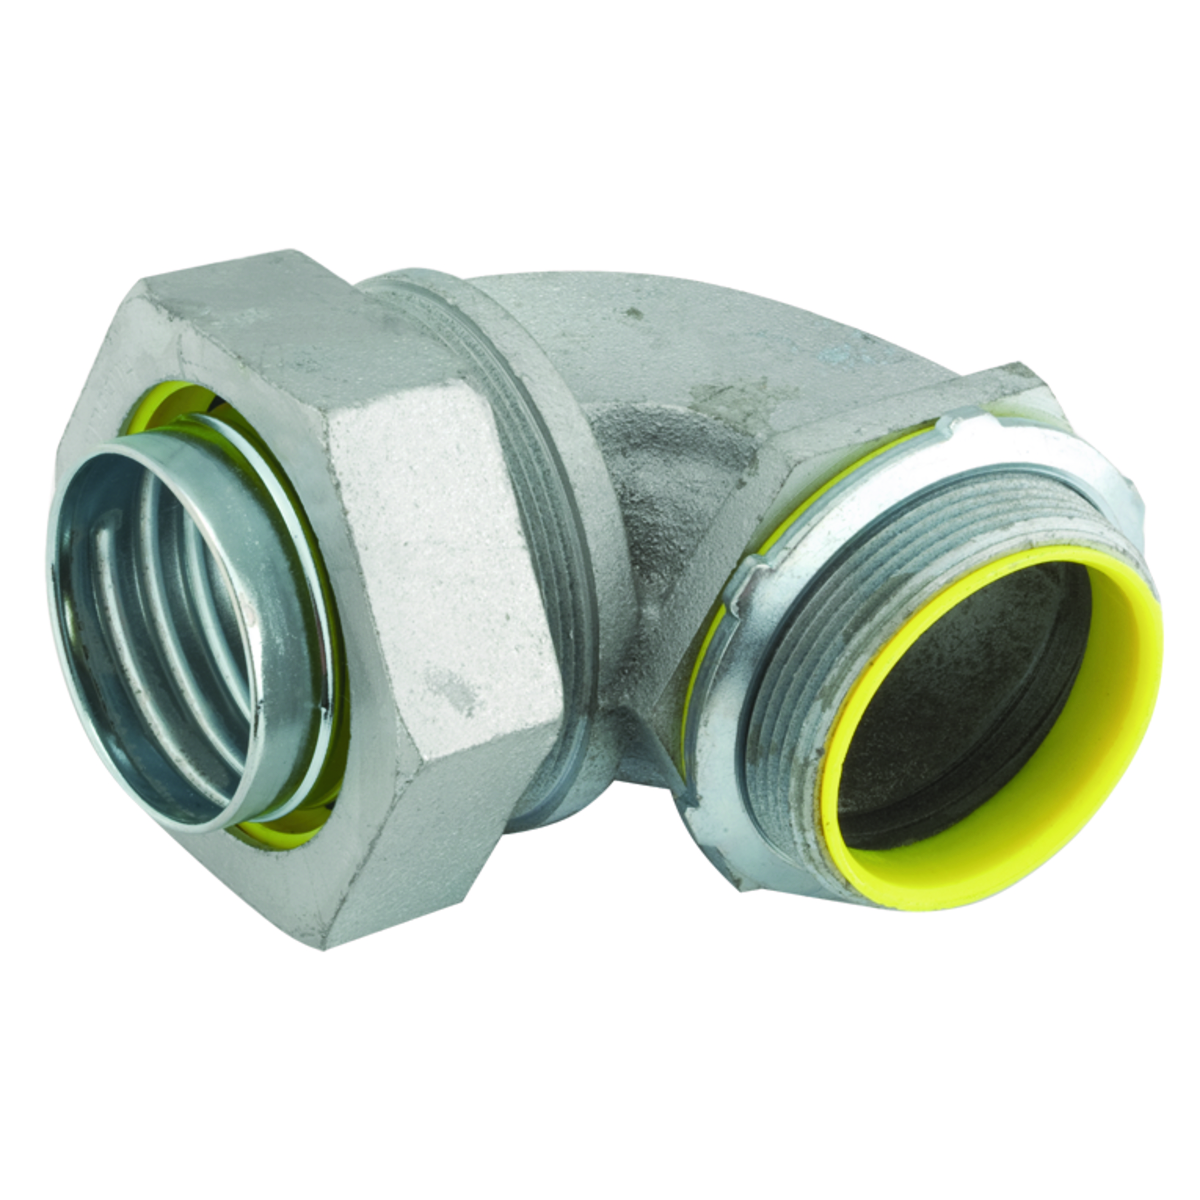 90 Degrees Insulated Connectors Steel/Malleable Iron, 3/8 In. Trade Size